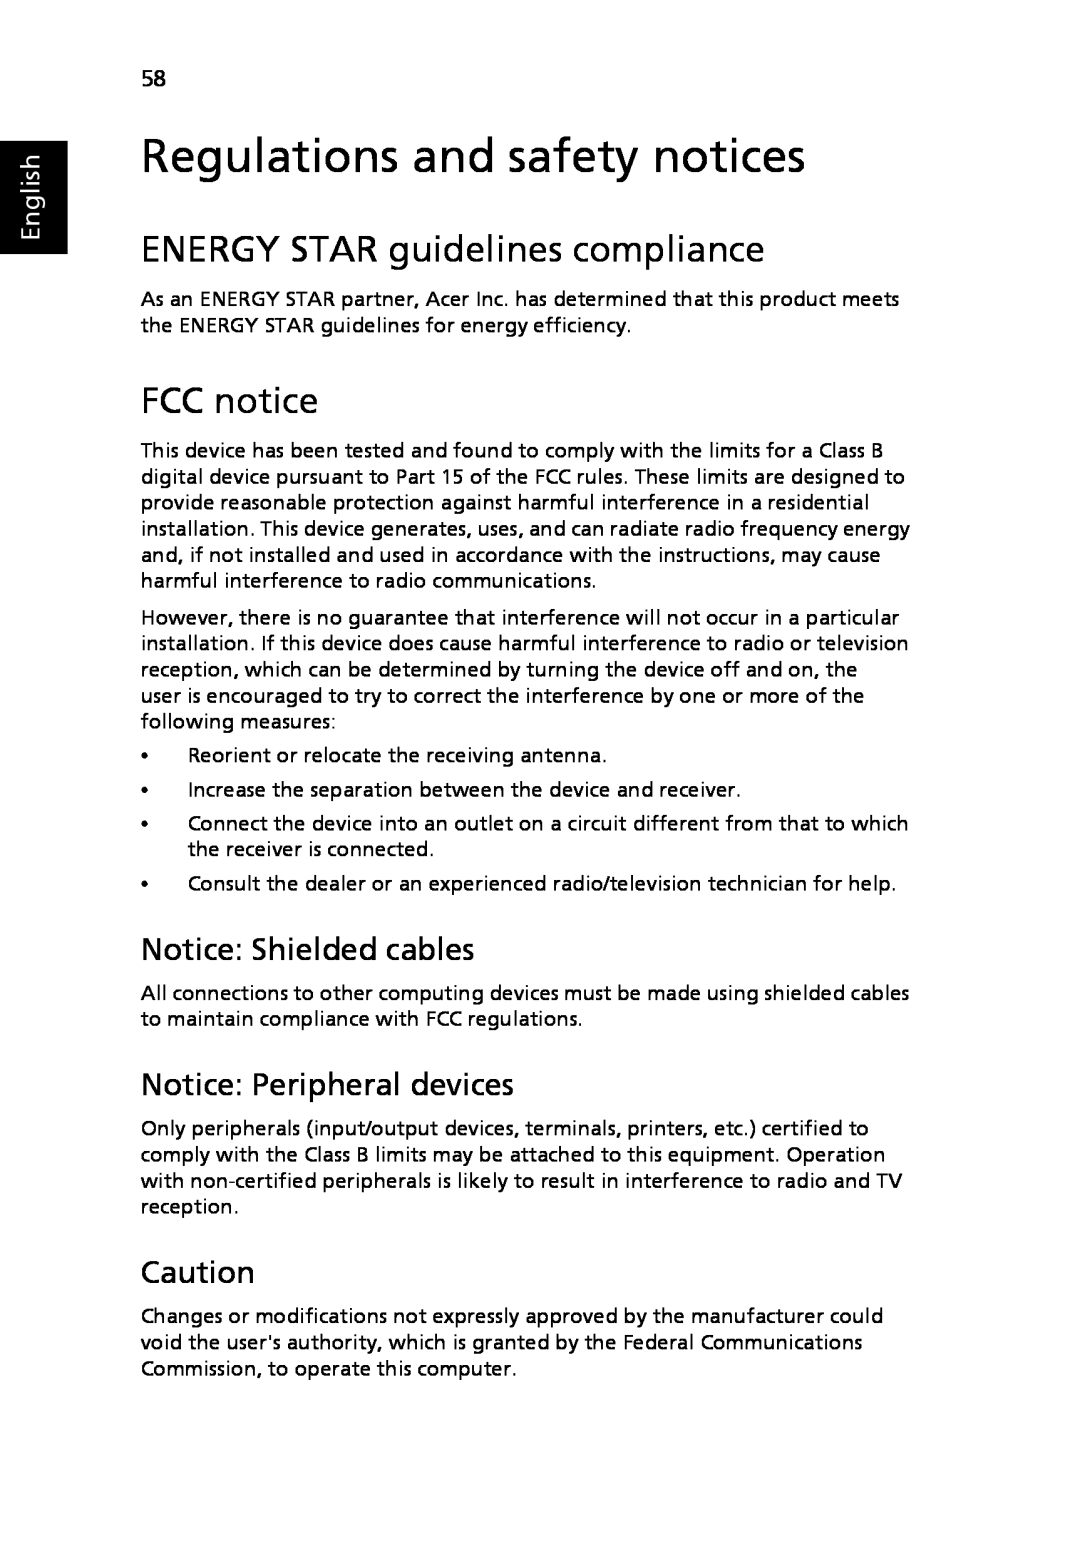 Acer 3630 Regulations and safety notices, ENERGY STAR guidelines compliance, FCC notice, Notice Shielded cables, English 